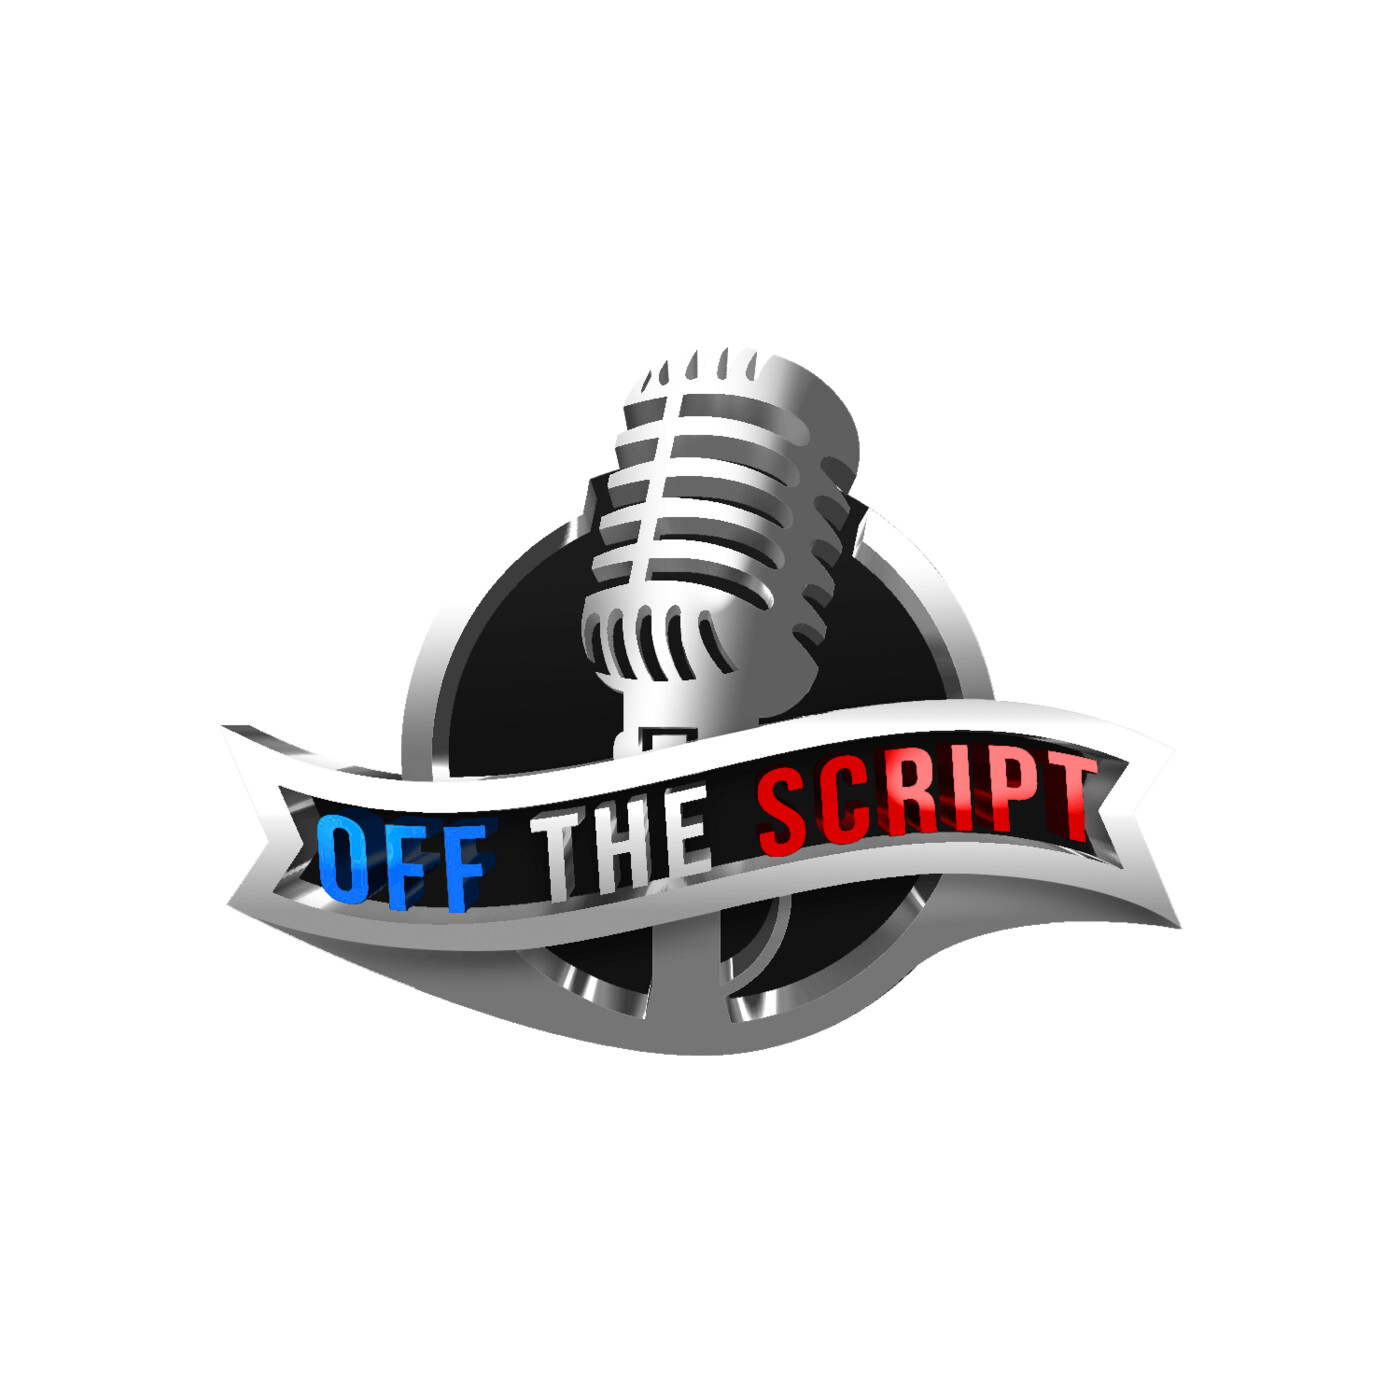 Off The Script 291: Kevin Owens Re-Signs With WWE For 2-3 Million Dollars Per year But Does This Financially Make WWE Look...Hypocritical?